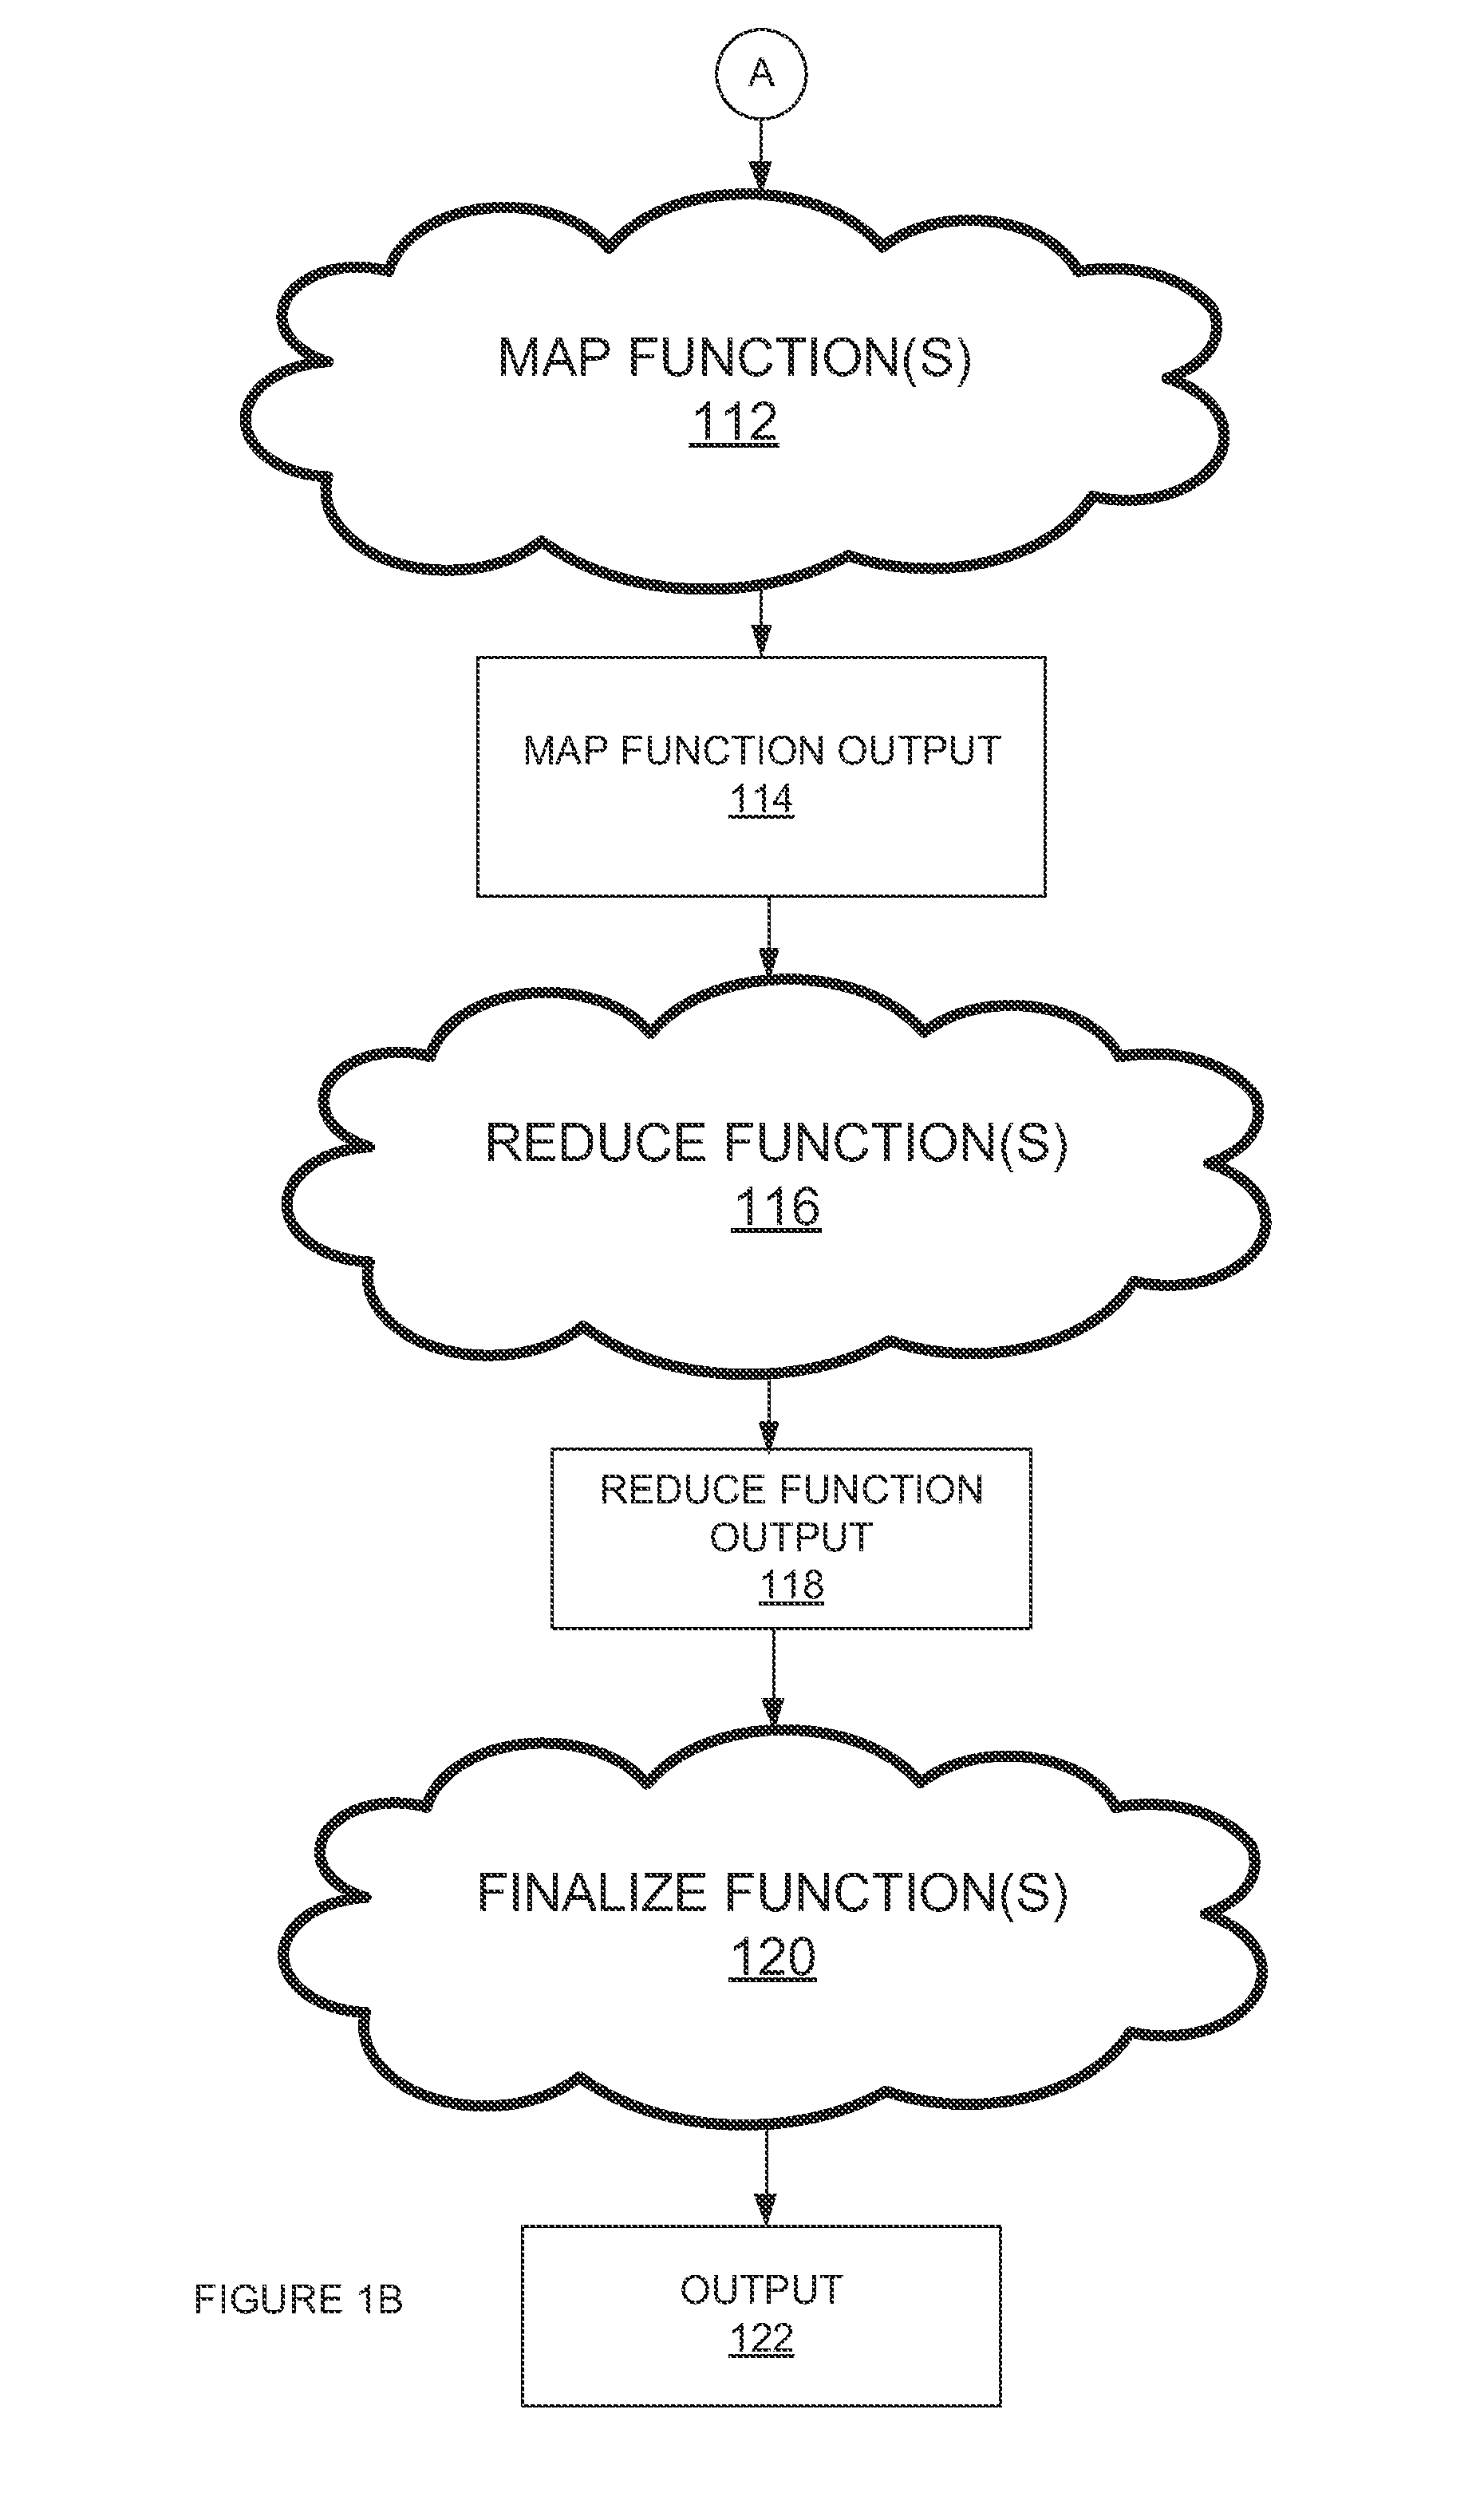 Method and system of mapreduce implementations on indexed datasets in a distributed database environment